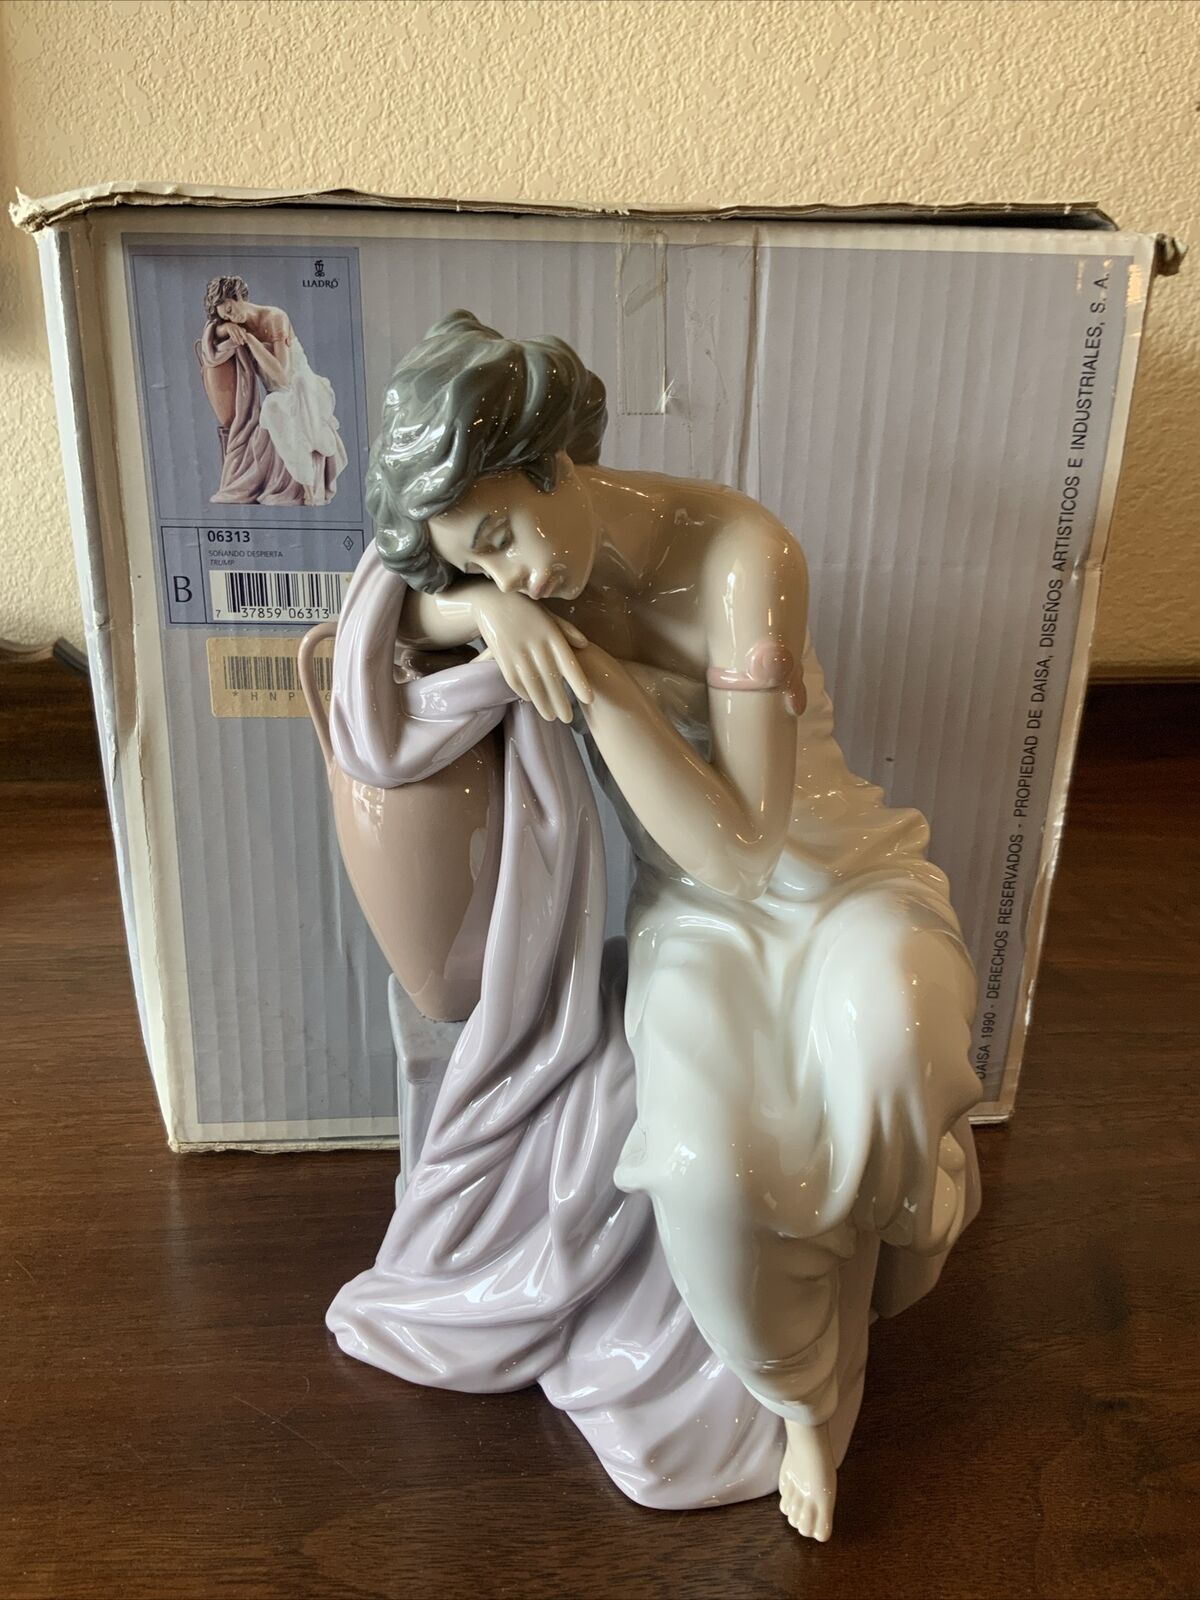 Lladro Large 10” Porcelain Figurine Young Women 06313 Lost in Dreams w/ Box